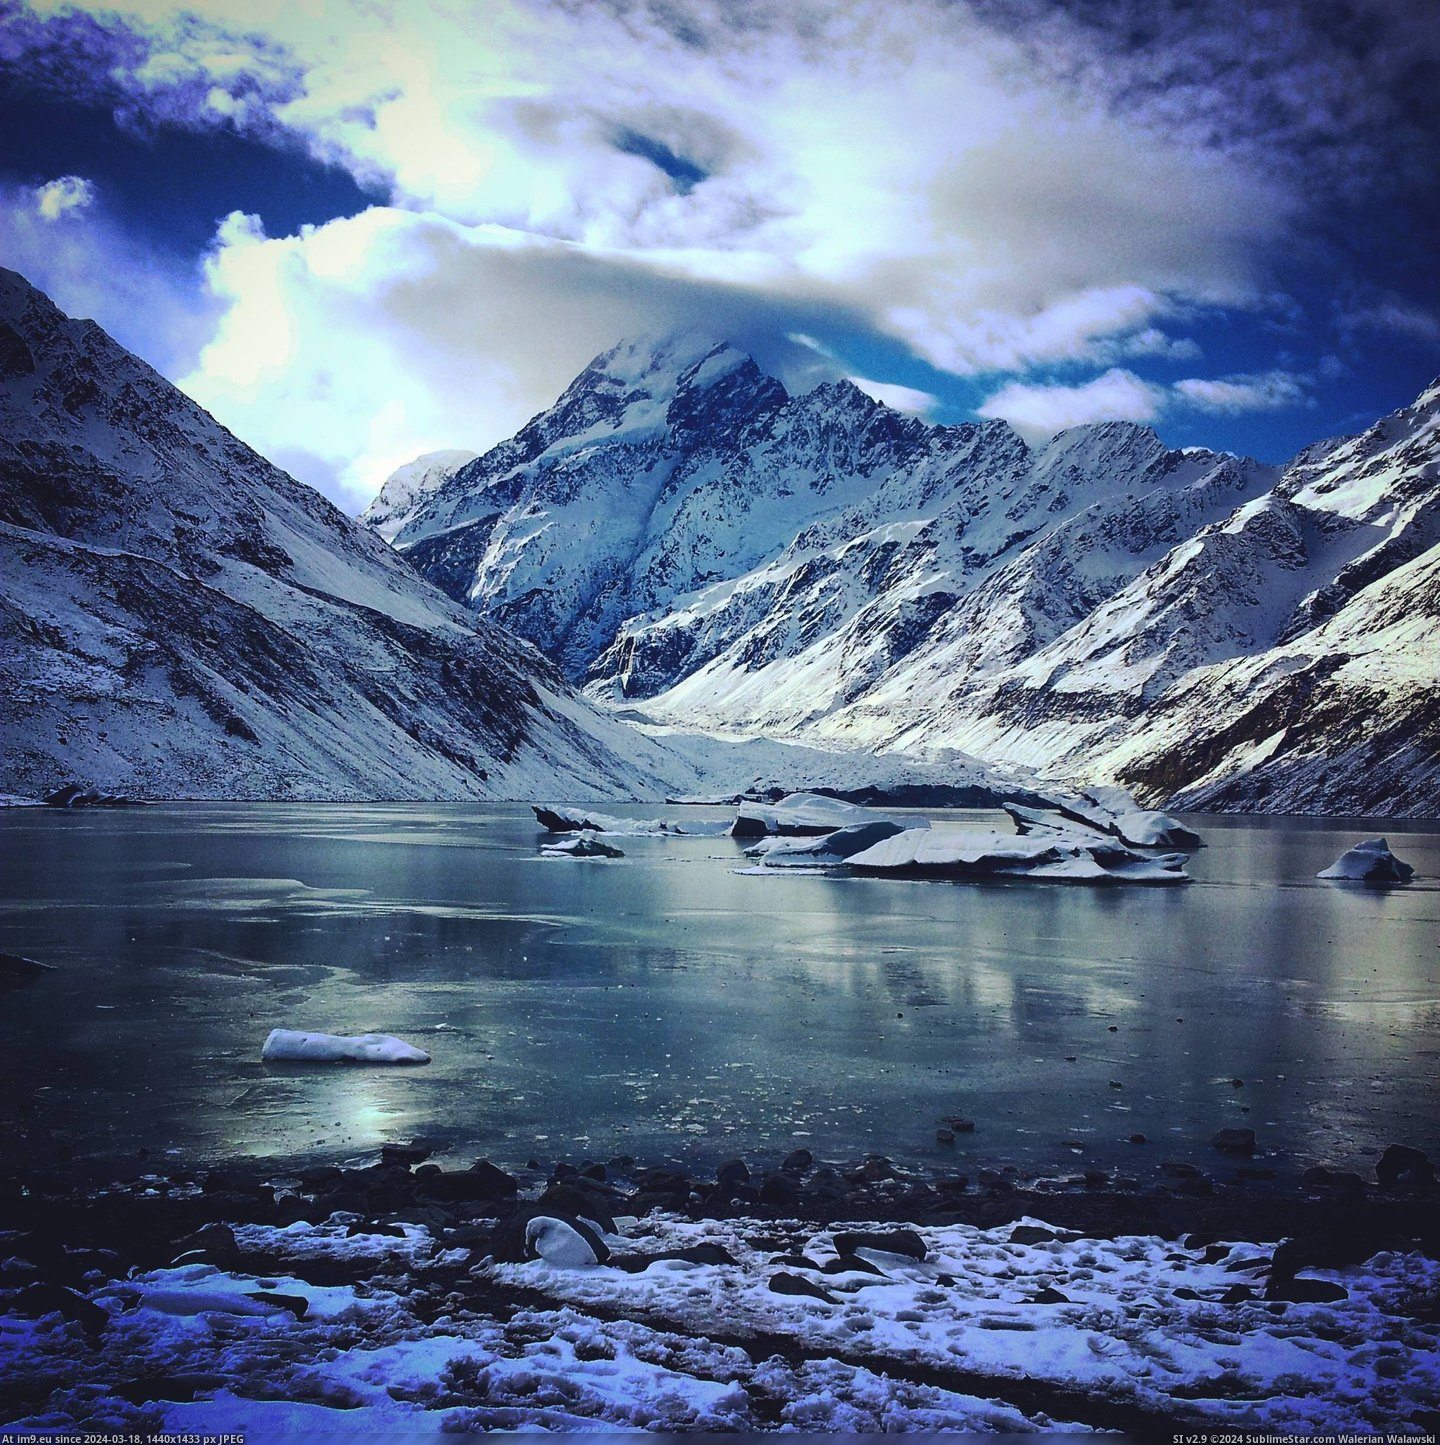 #Hooker #Lake #End #Frozen #Track #Cook #Valley #Mount #Zealand [Earthporn] The frozen lake at the end of the Hooker Valley track, Mount Cook, New Zealand [2448x2448px] Pic. (Bild von album My r/EARTHPORN favs))